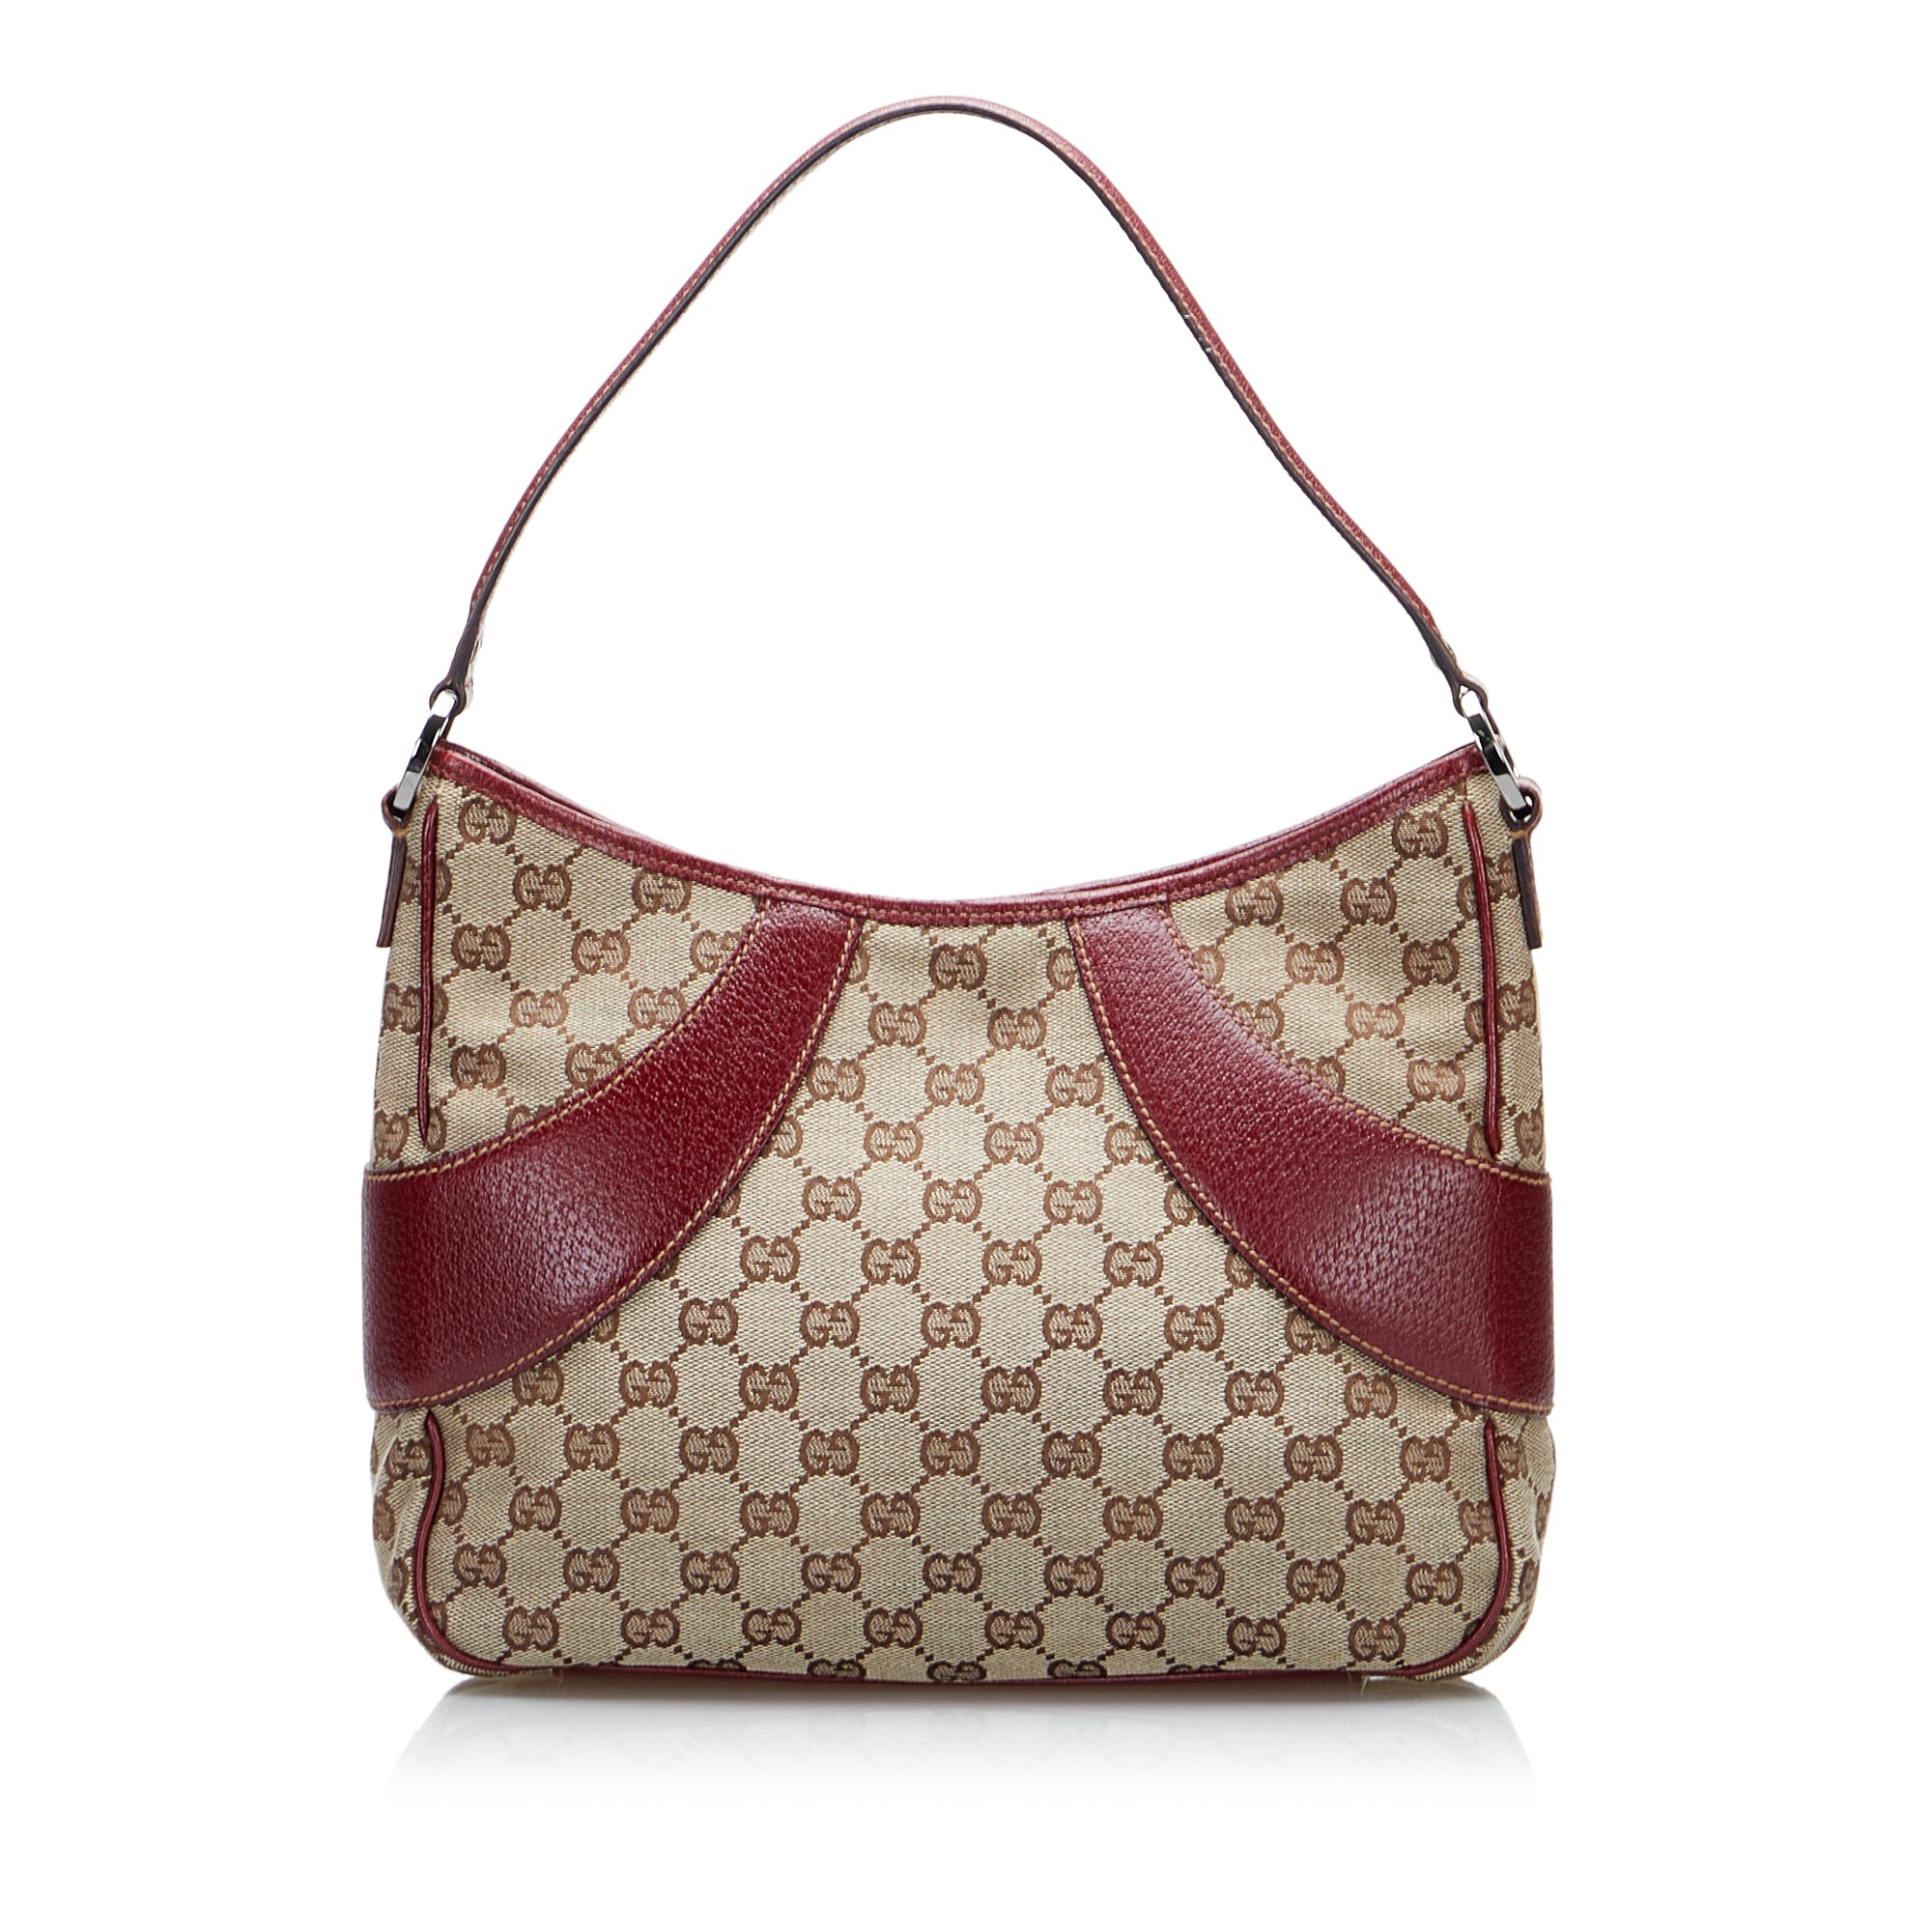 GUCCI Shoulder Bag 113013 Square type GG canvas/leather Brown